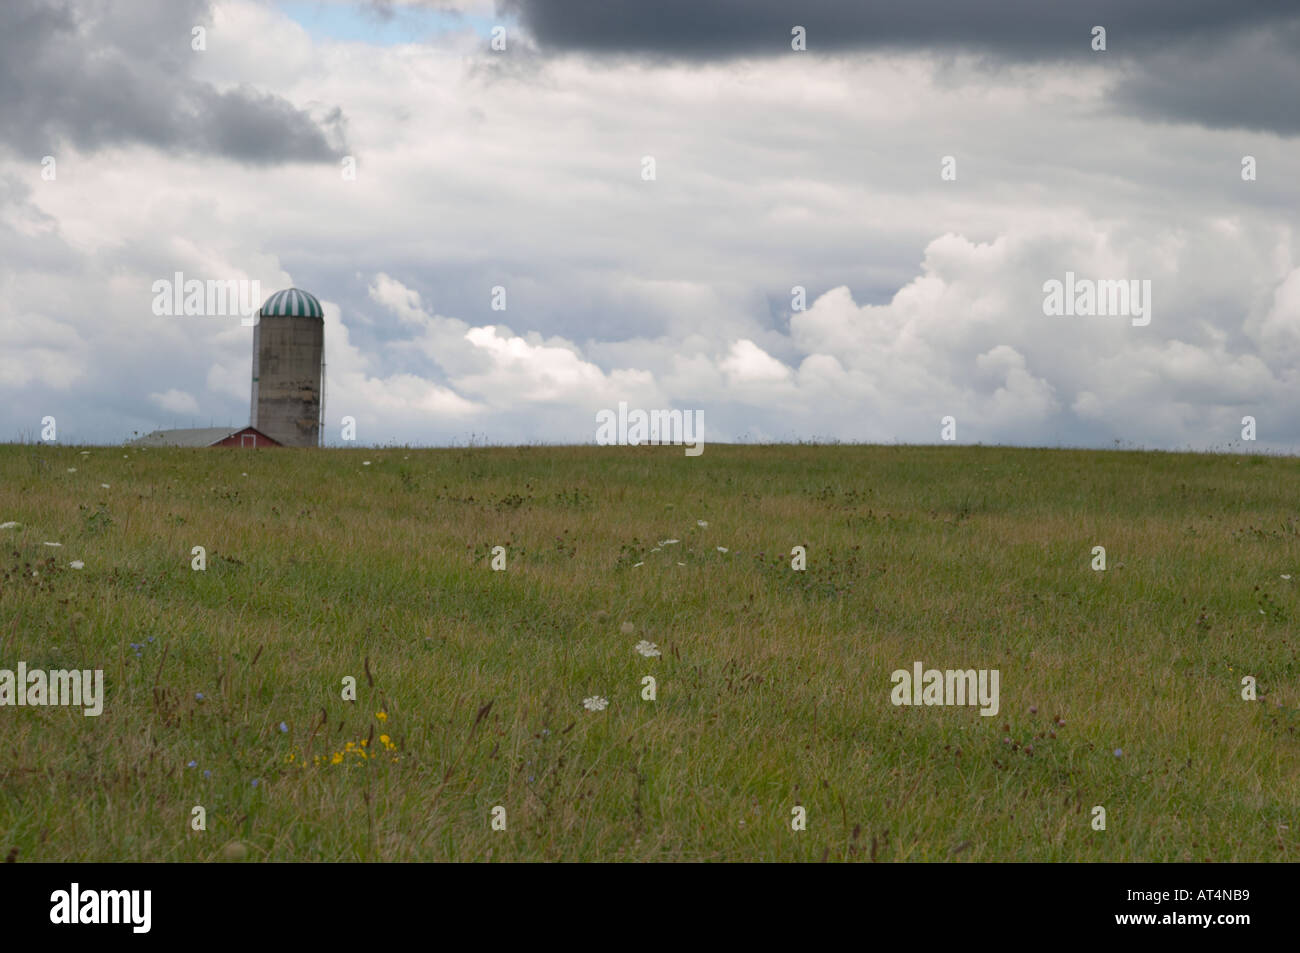 Barn silo on top of hill with stormy sky in background Stock Photo